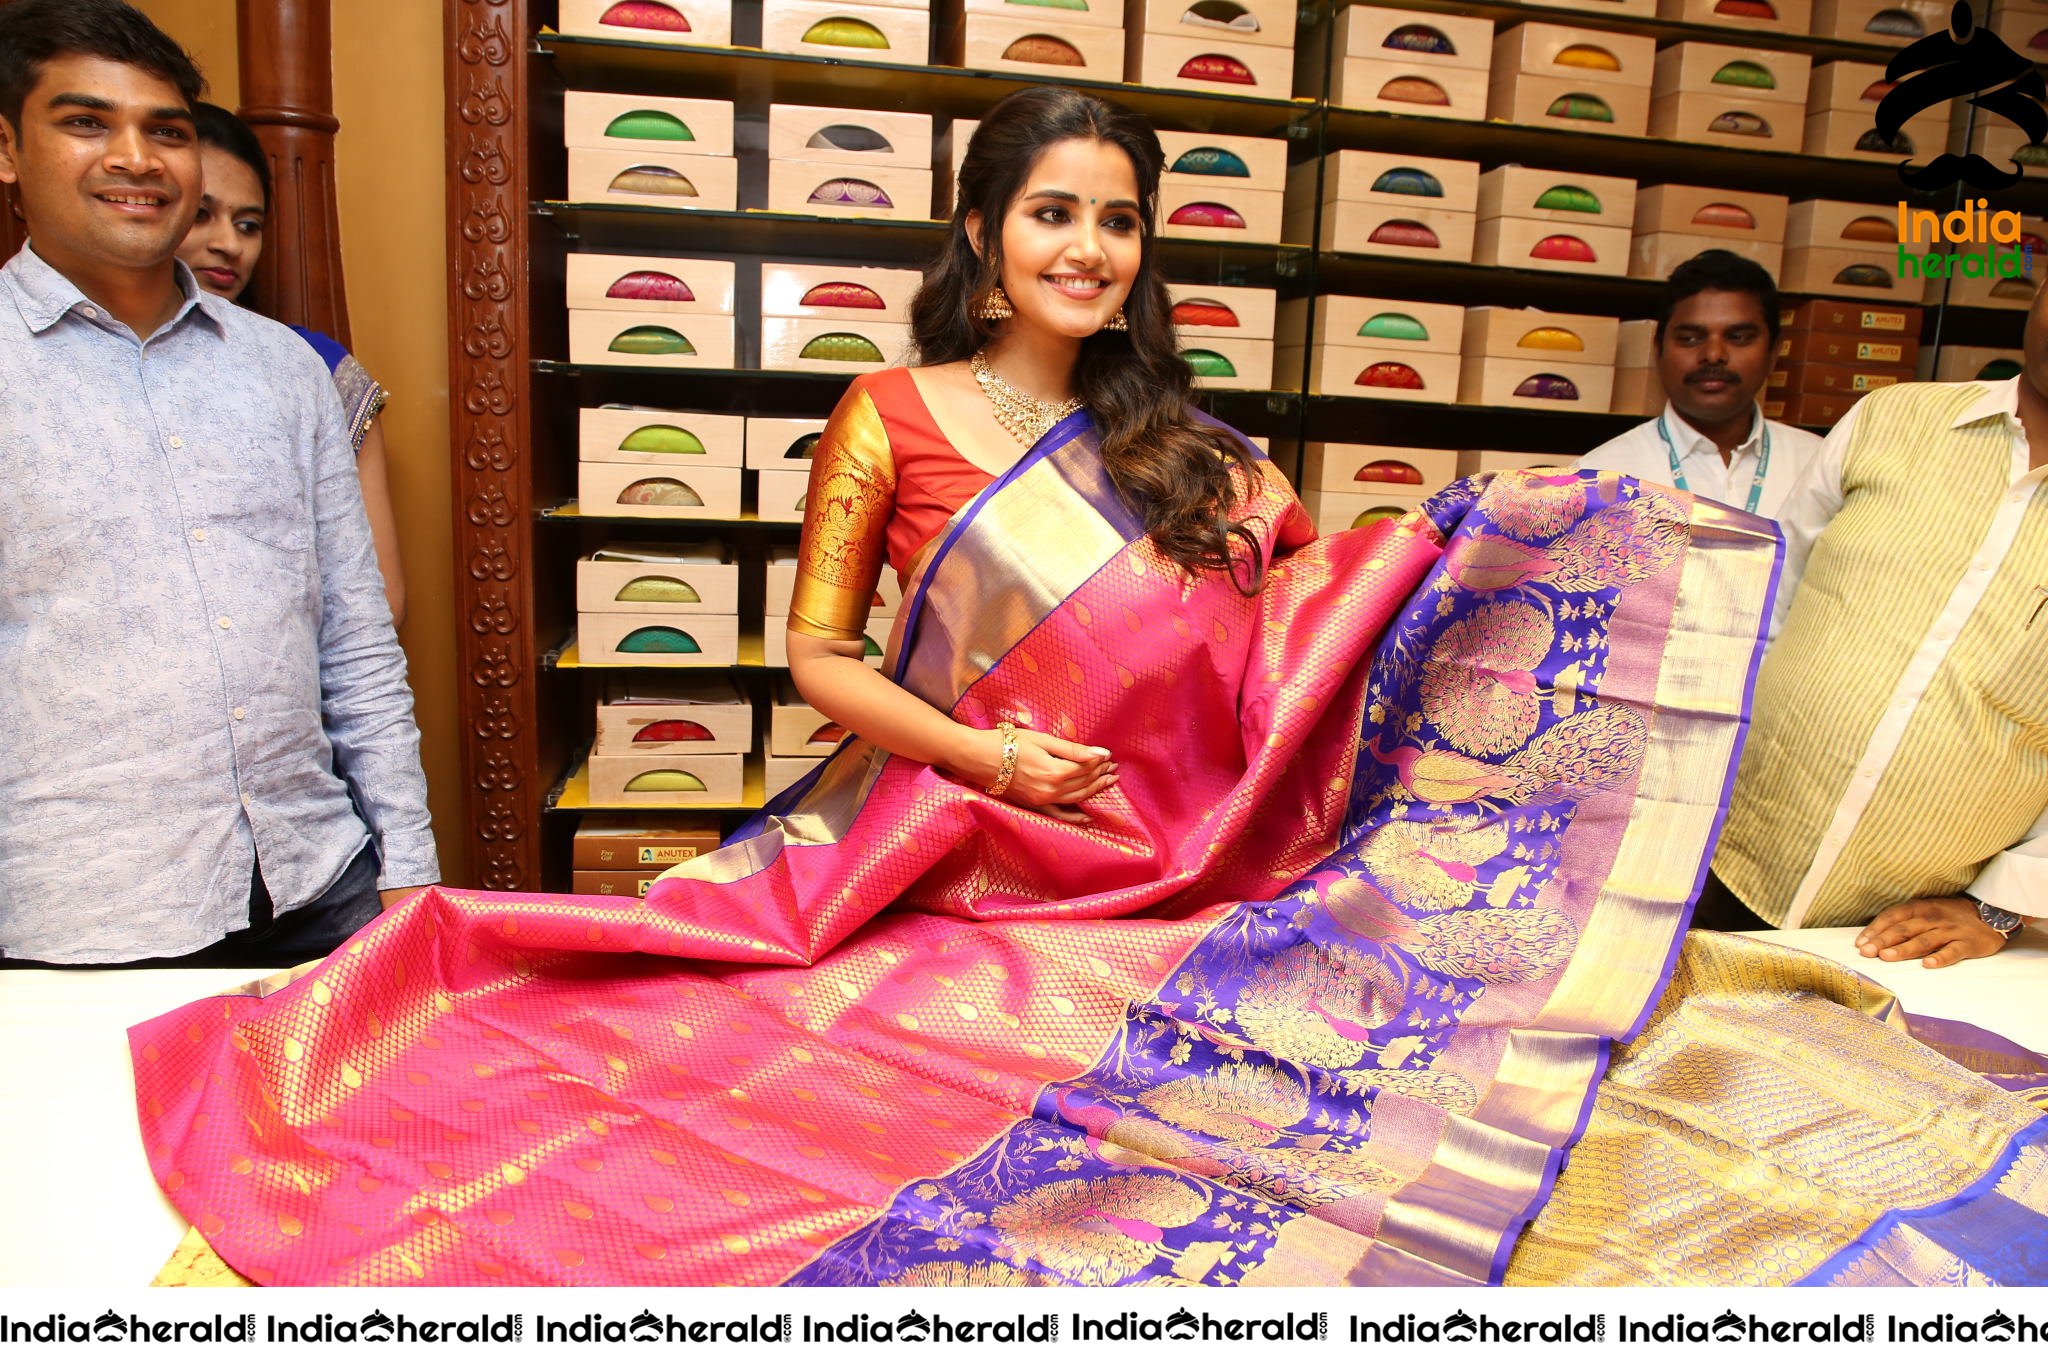 Anutex Shopping Mall Grand Festival Prizes And Collection Launched By Actress Anupama Parameswaran Set 5